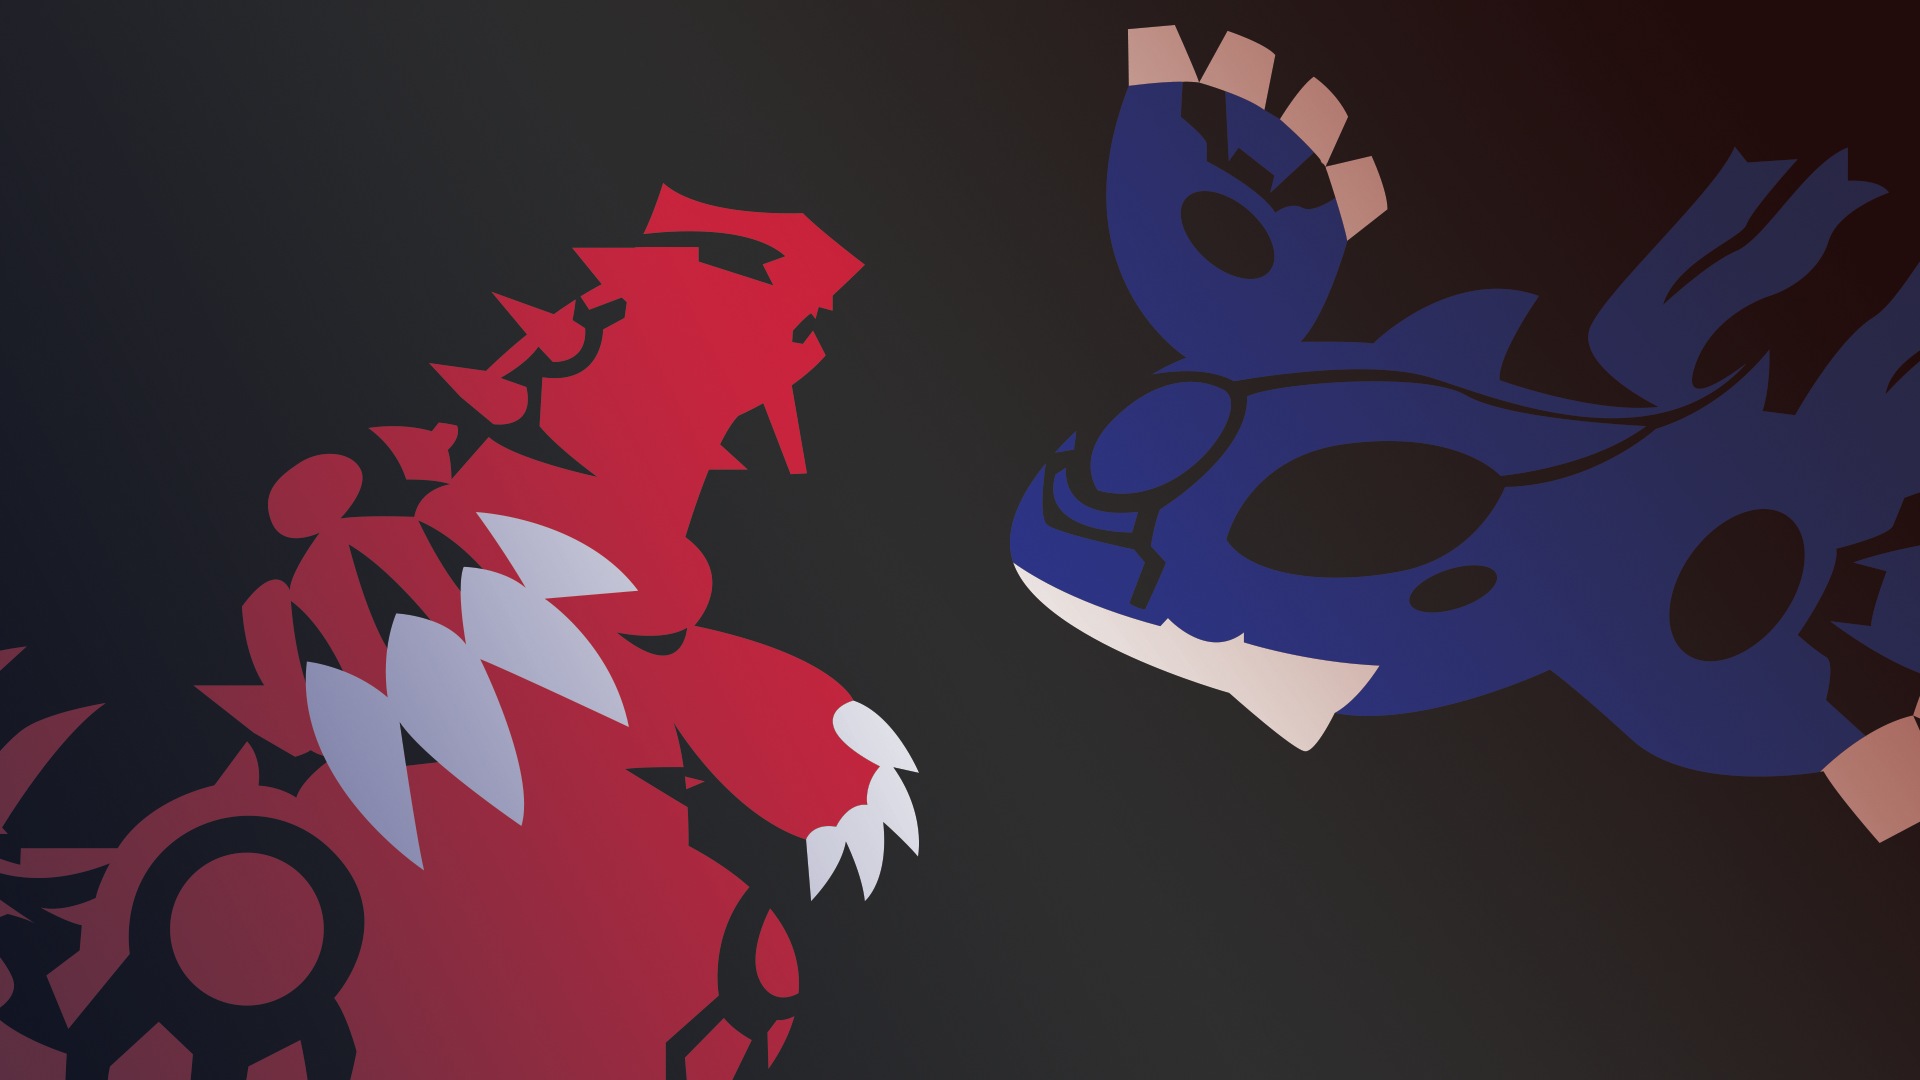 Pokemon: Ruby, Sapphire, and Emerald Wallpapers